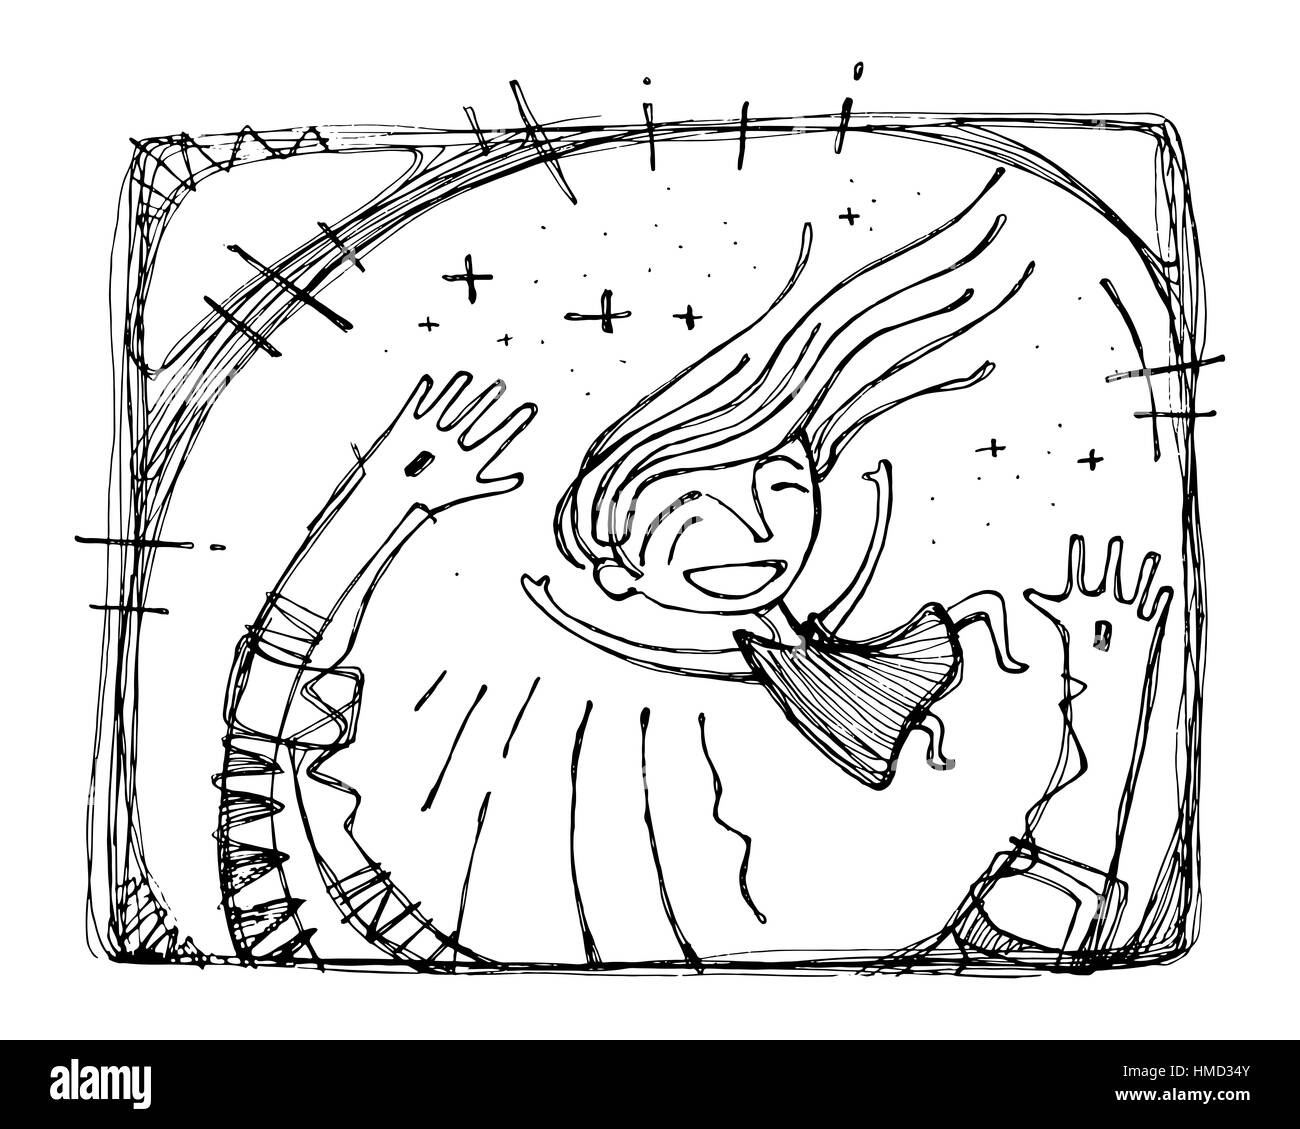 Hand drawn vector illustration or drawing of a happy girl playing on Jesus Christ arms Stock Photo